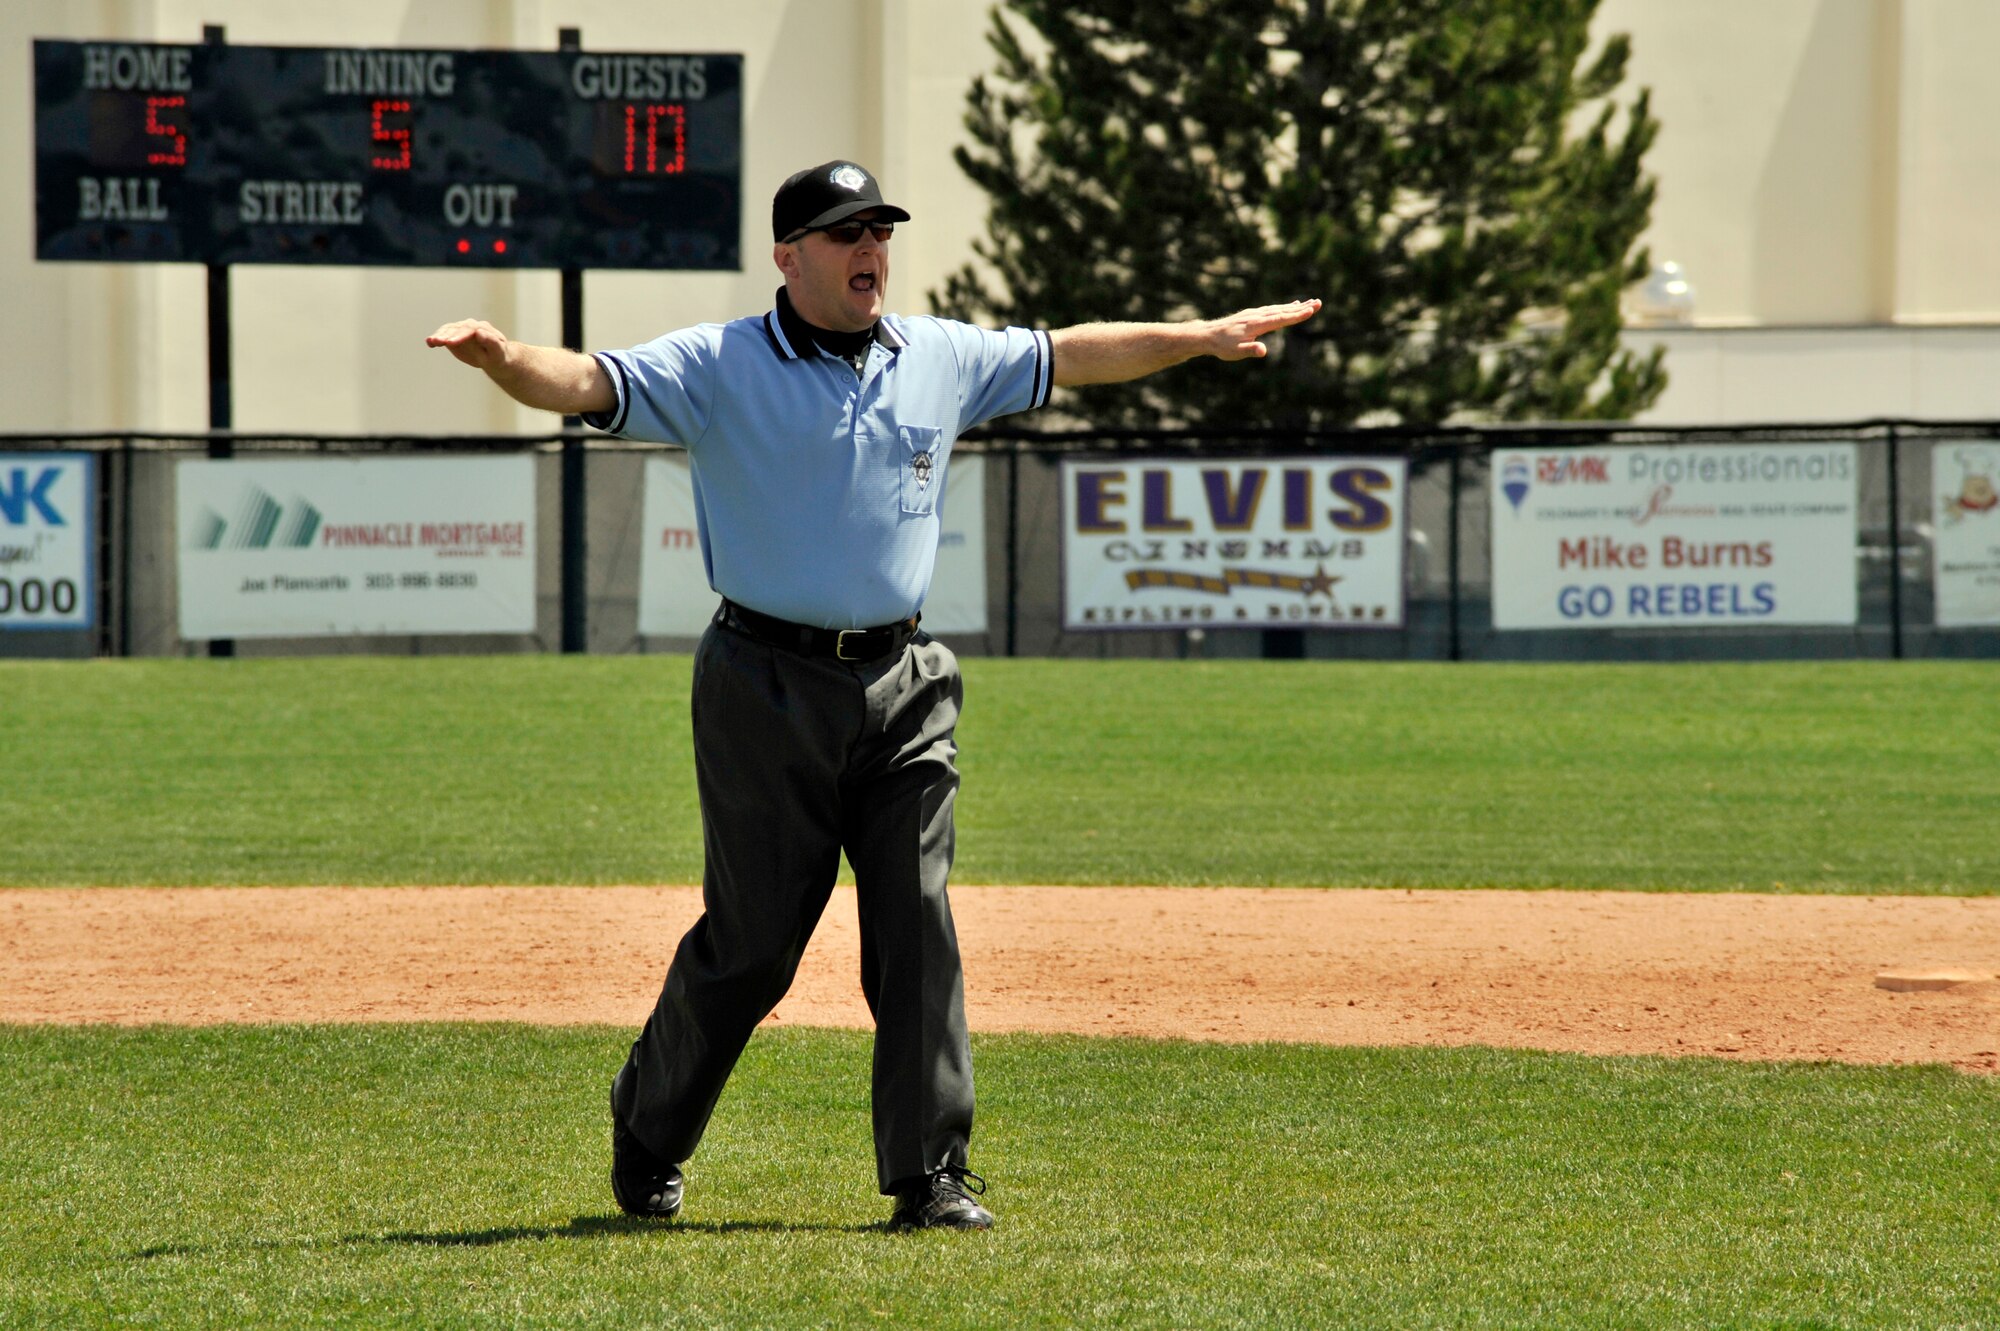 COLUMBINE, Colo. -- Staff Sgt. Larry Bouchard, Air Force Intelligence, Surveillance, and Reconnaissance Agency Detachment 45 Satellite Operations non-commissioned officer-in-charge, gives the "safe" signal during a local high school varsity baseball game May 1. Sergeant Bouchard is certified through the National Federation of State High School Associations and has been umpiring for the last four years. (U.S. Air Force photo by Staff Sgt. Kathrine McDowell)
